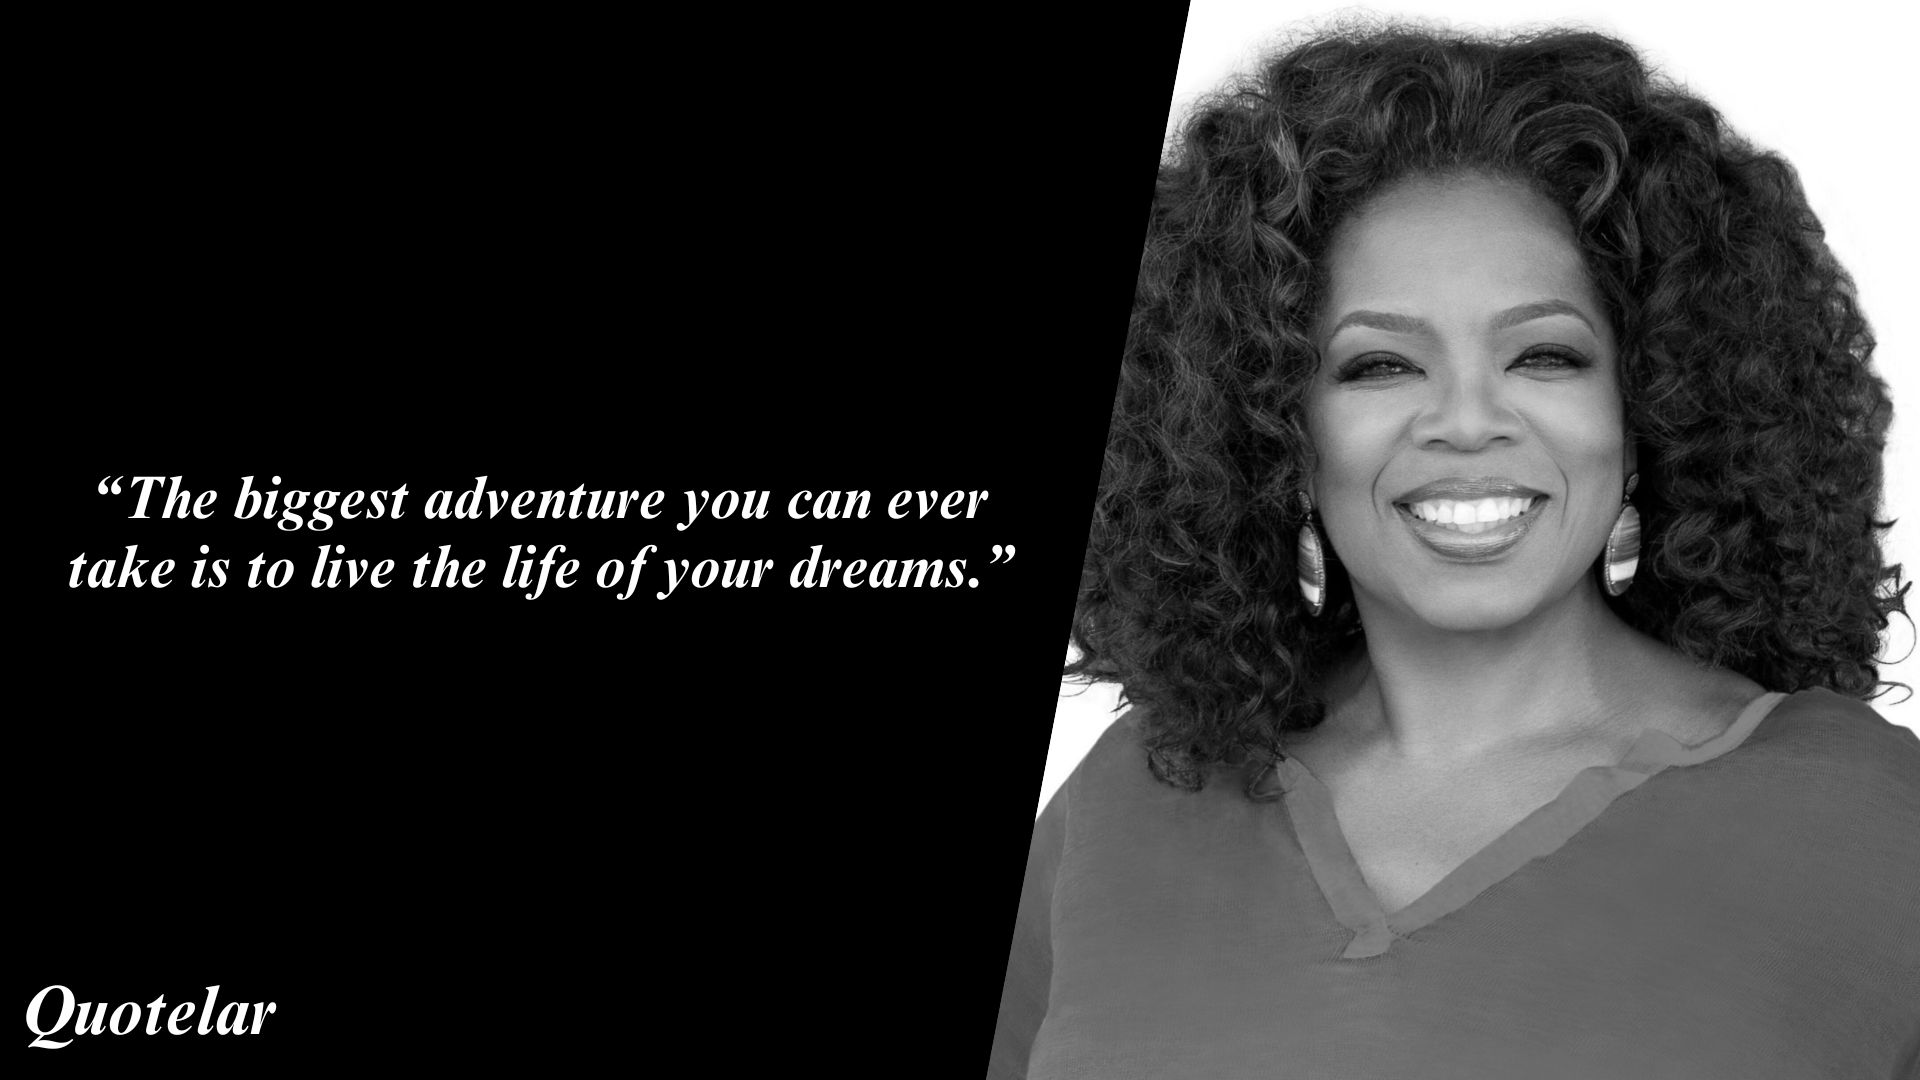 Oprah Winfrey: “Align Your Personality With Your Purpose